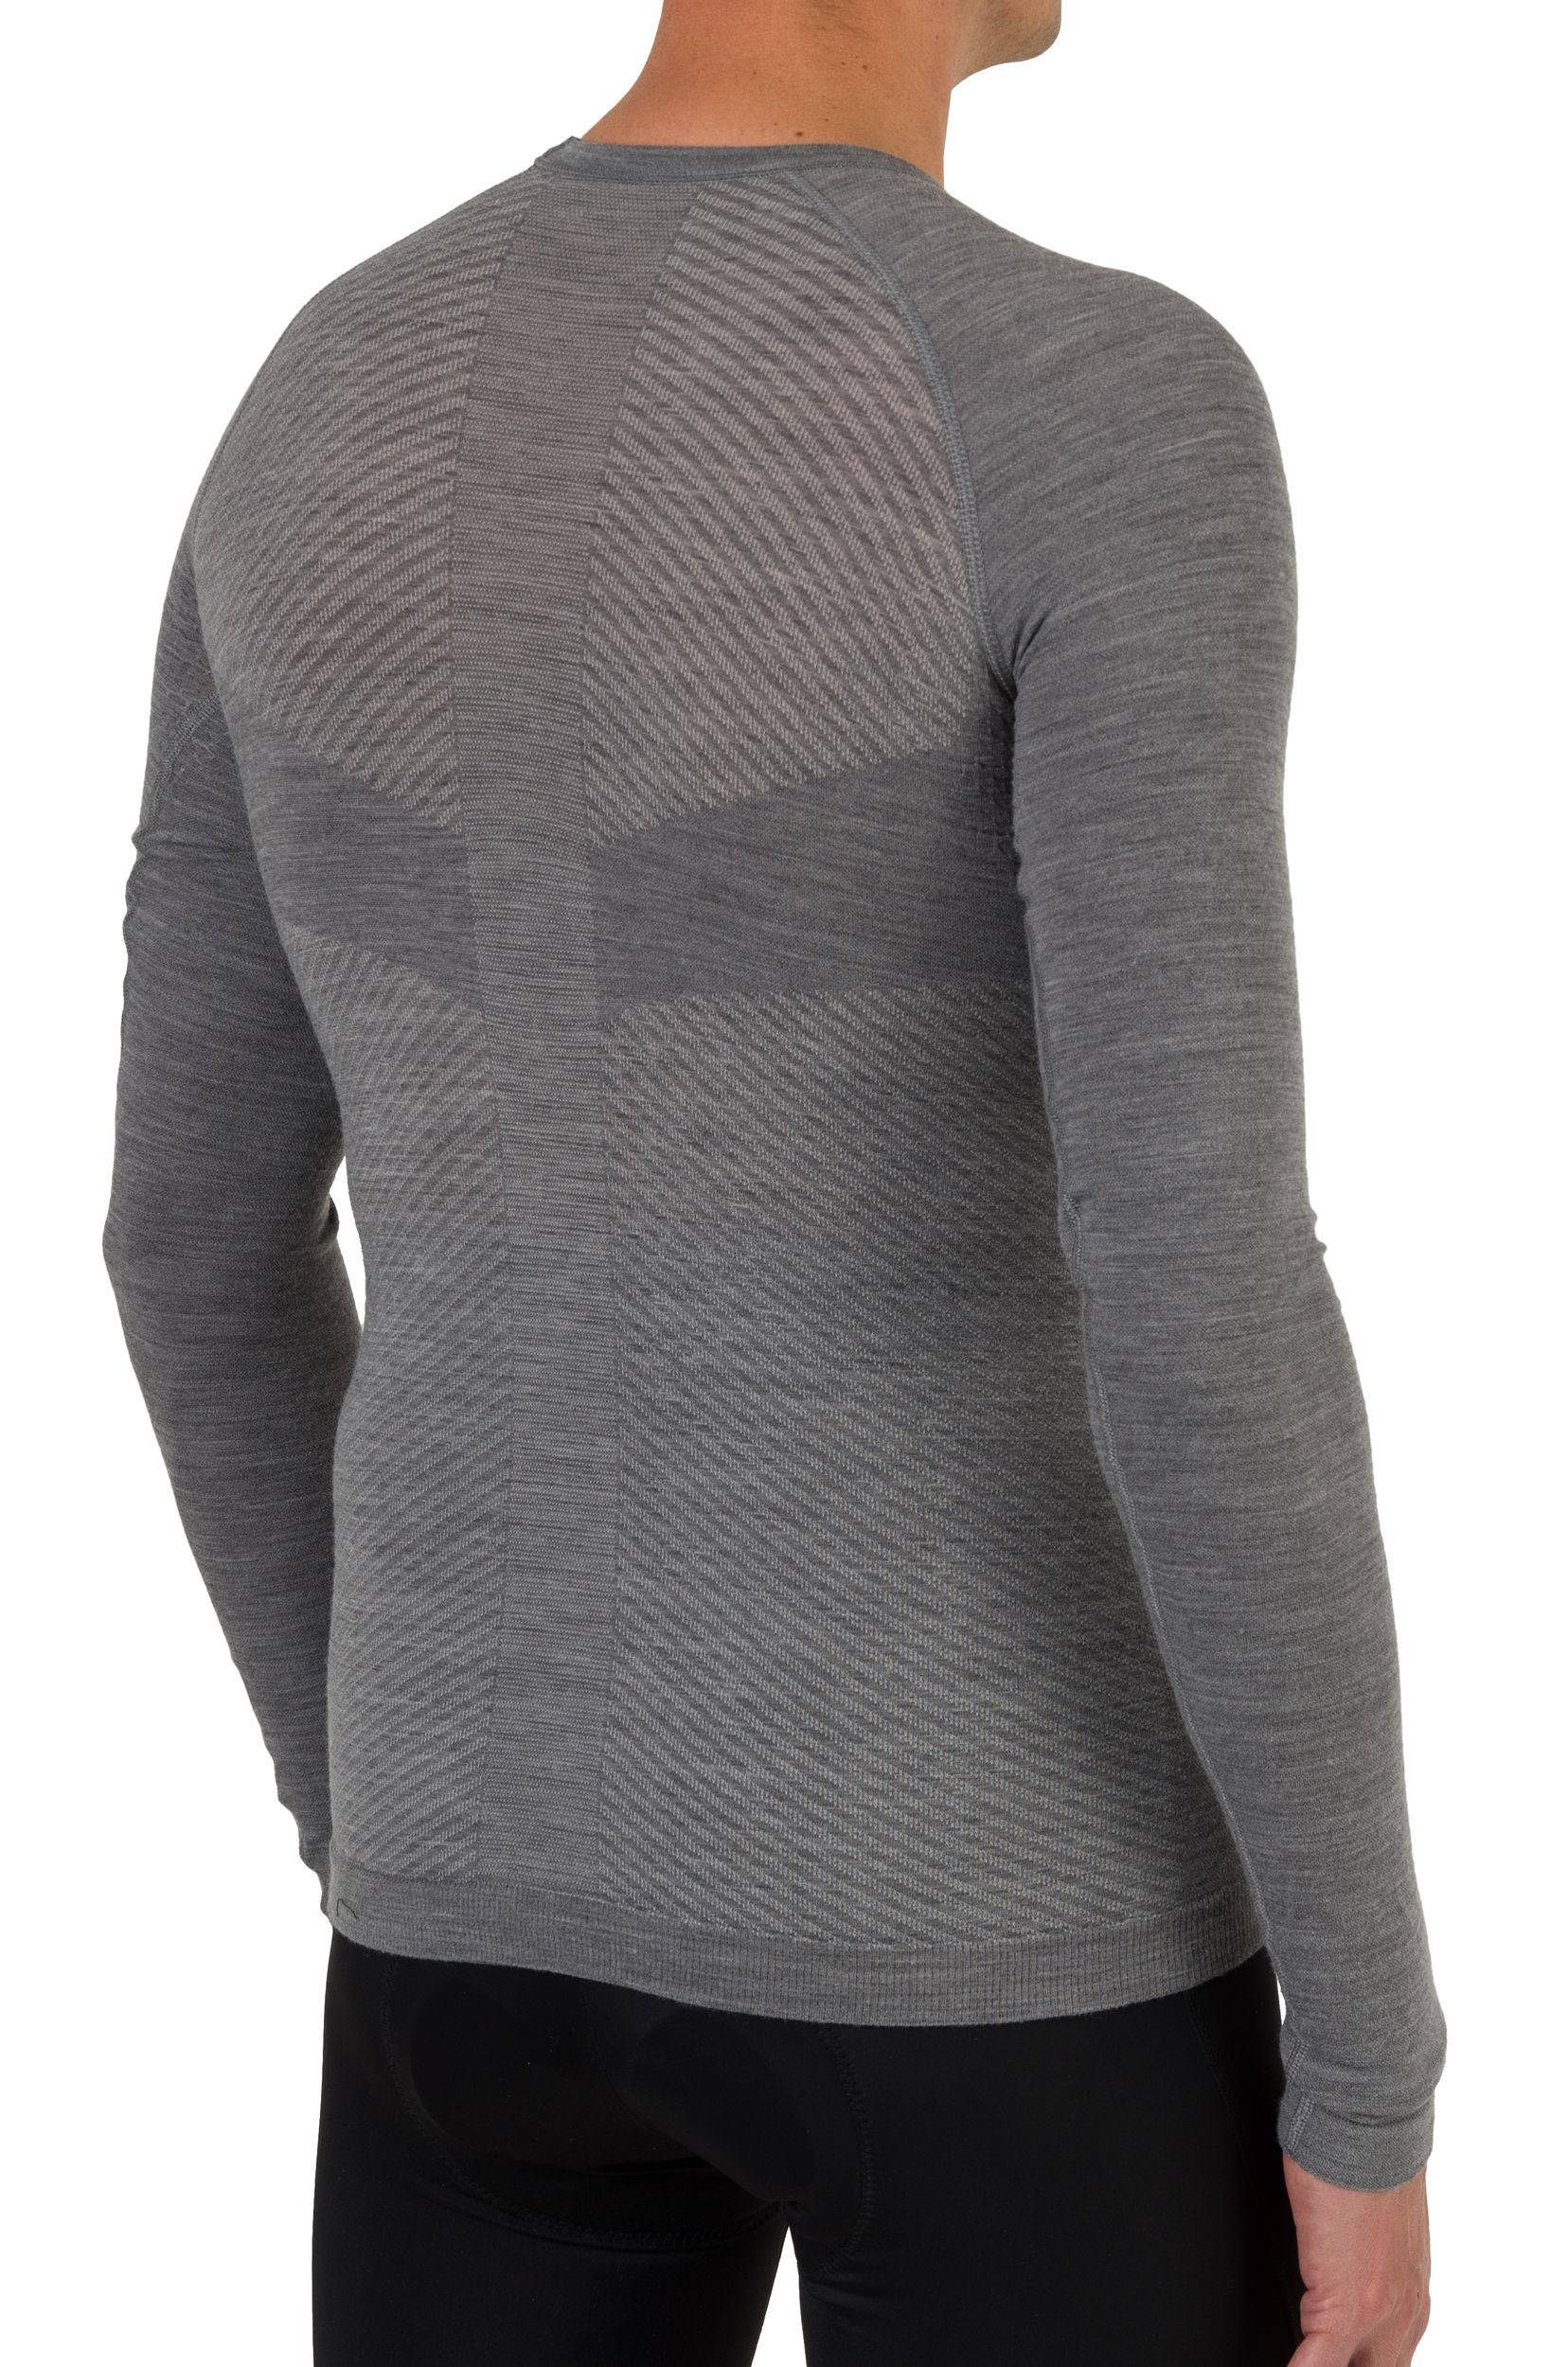 Winterday Merino Base Layer LS Essential fit example